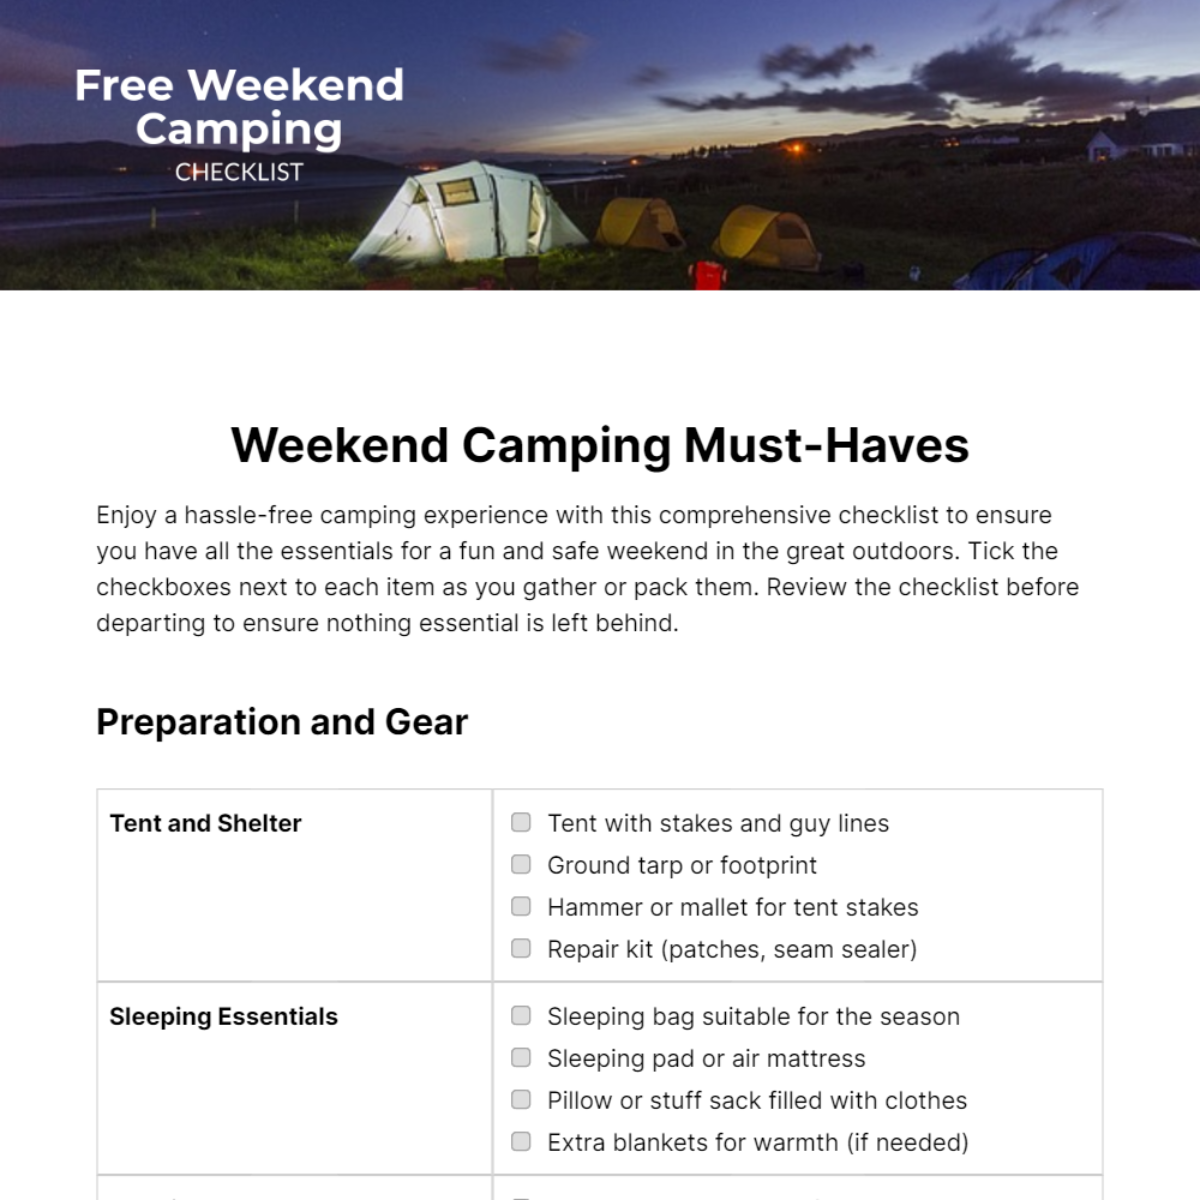 Weekend Camping Checklist Template